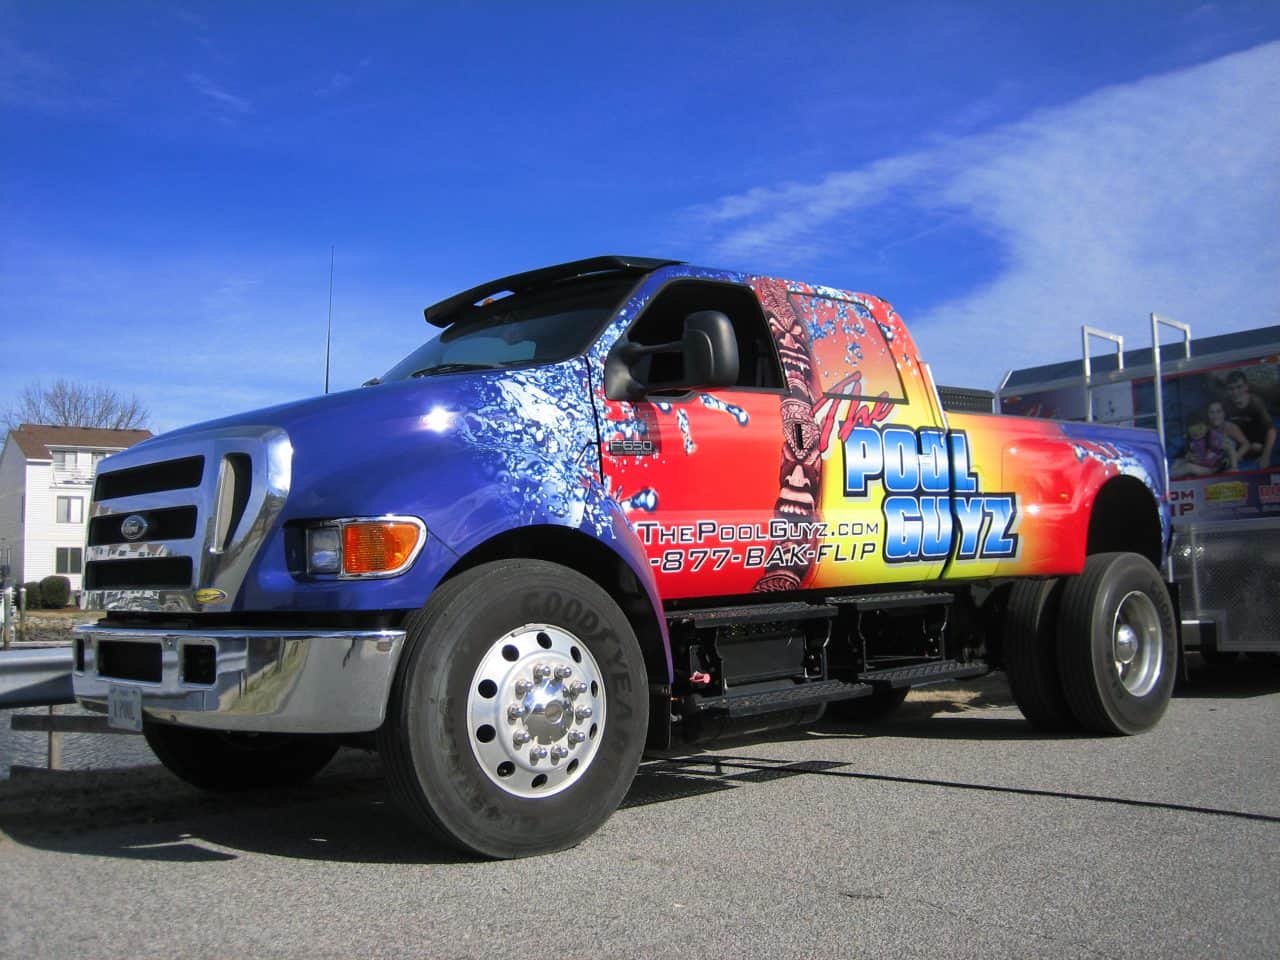 Pickup truck wraps and graphics